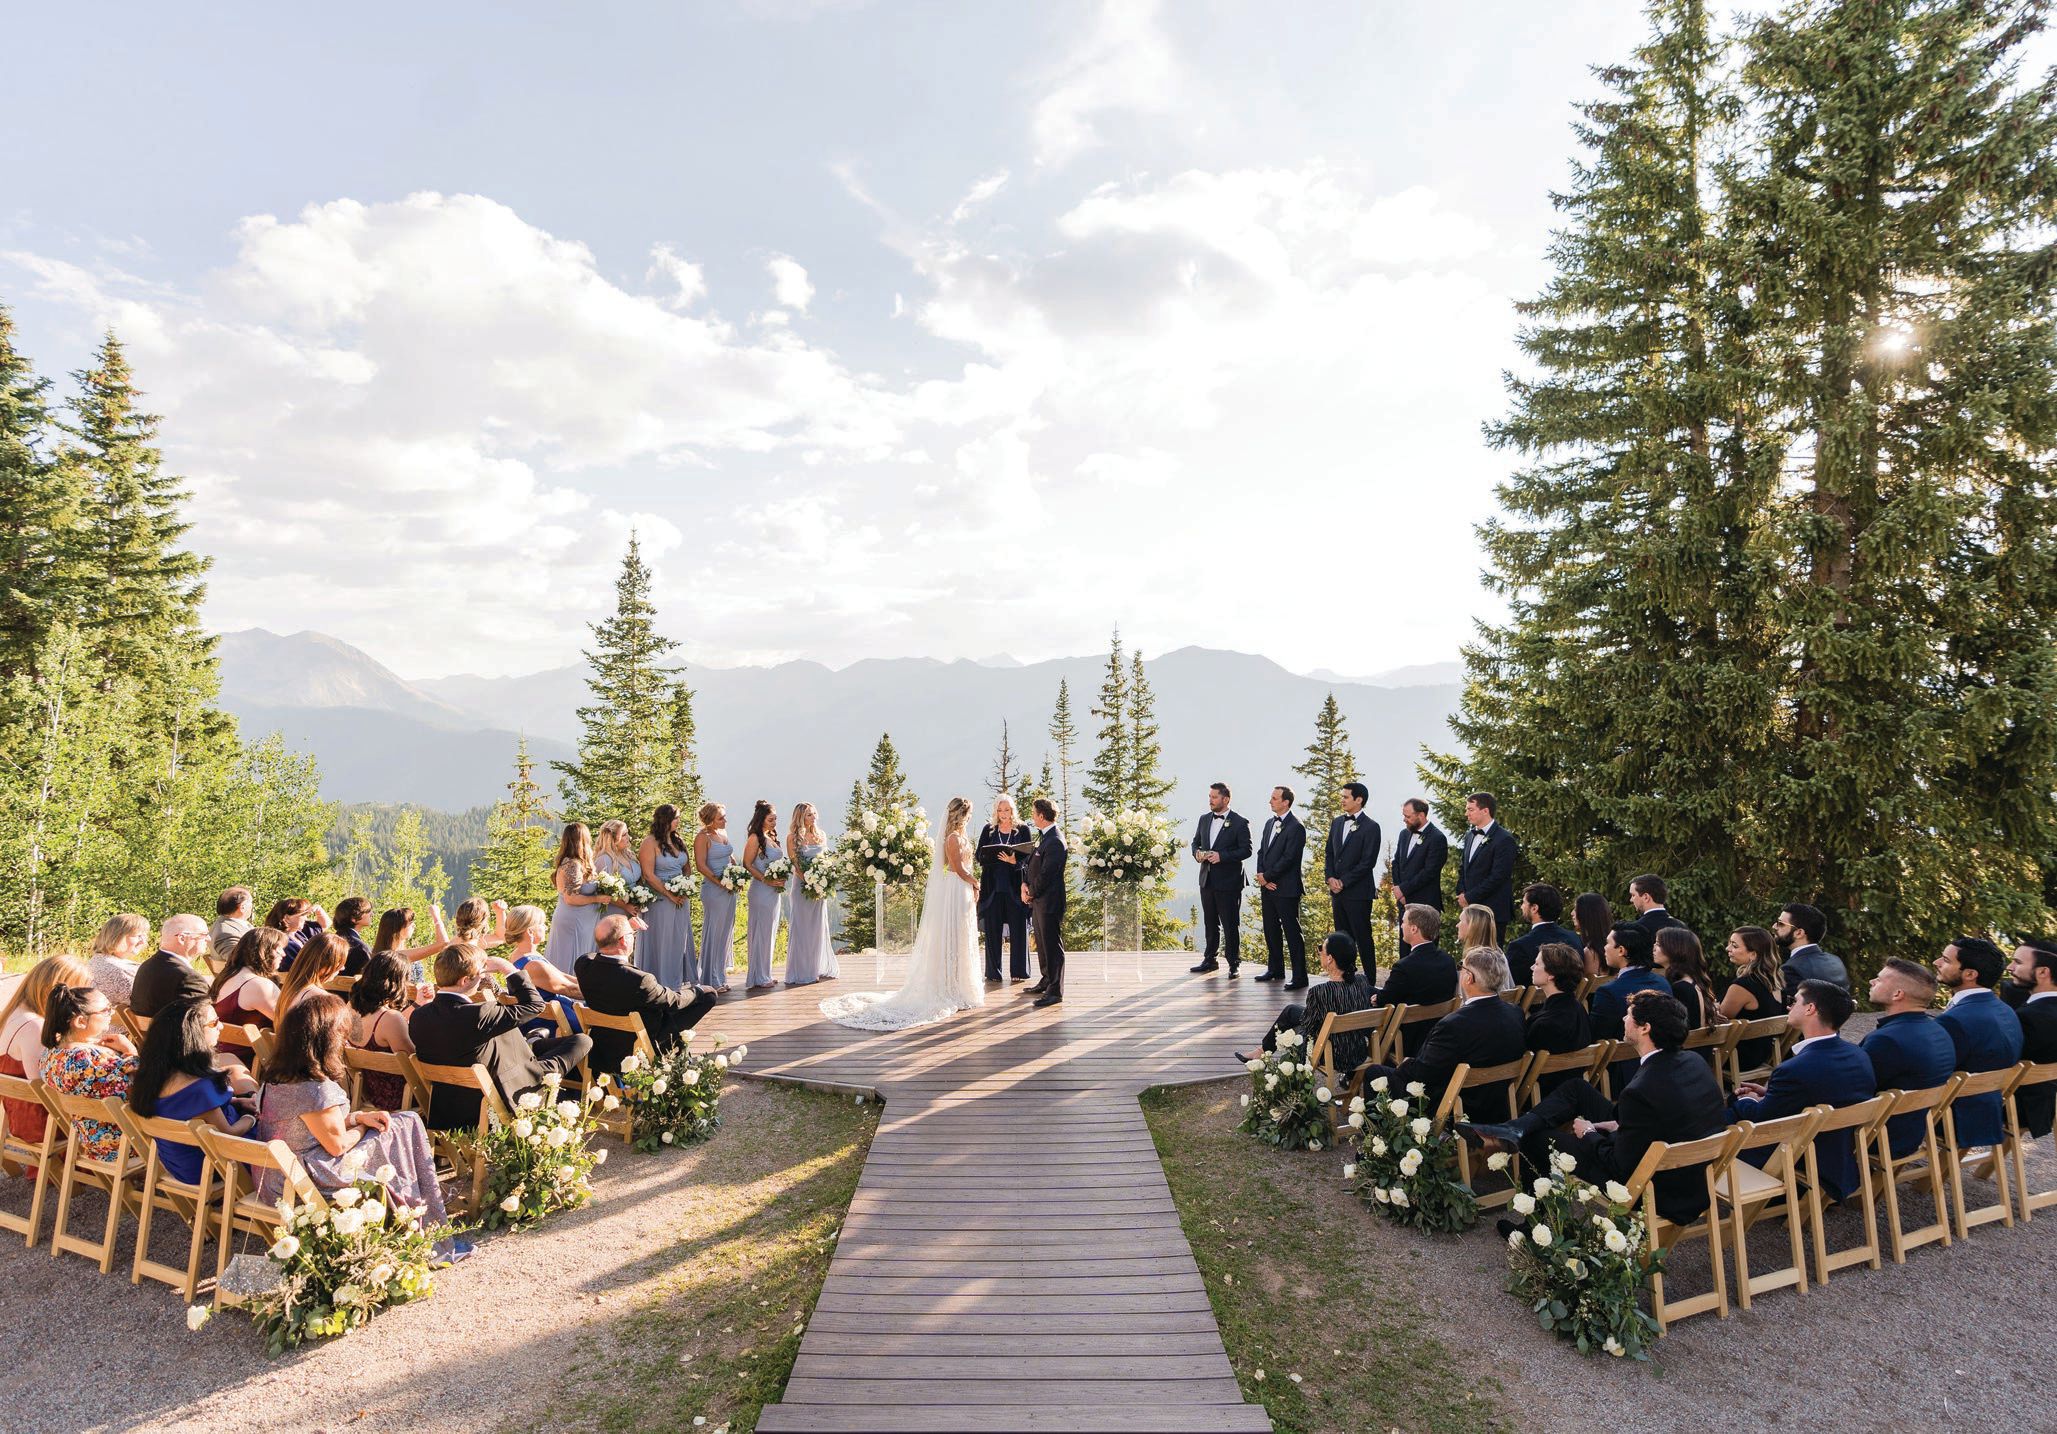 The outdoor wedding deck at The Little Nell PHOTO: BY RACHEL GREG